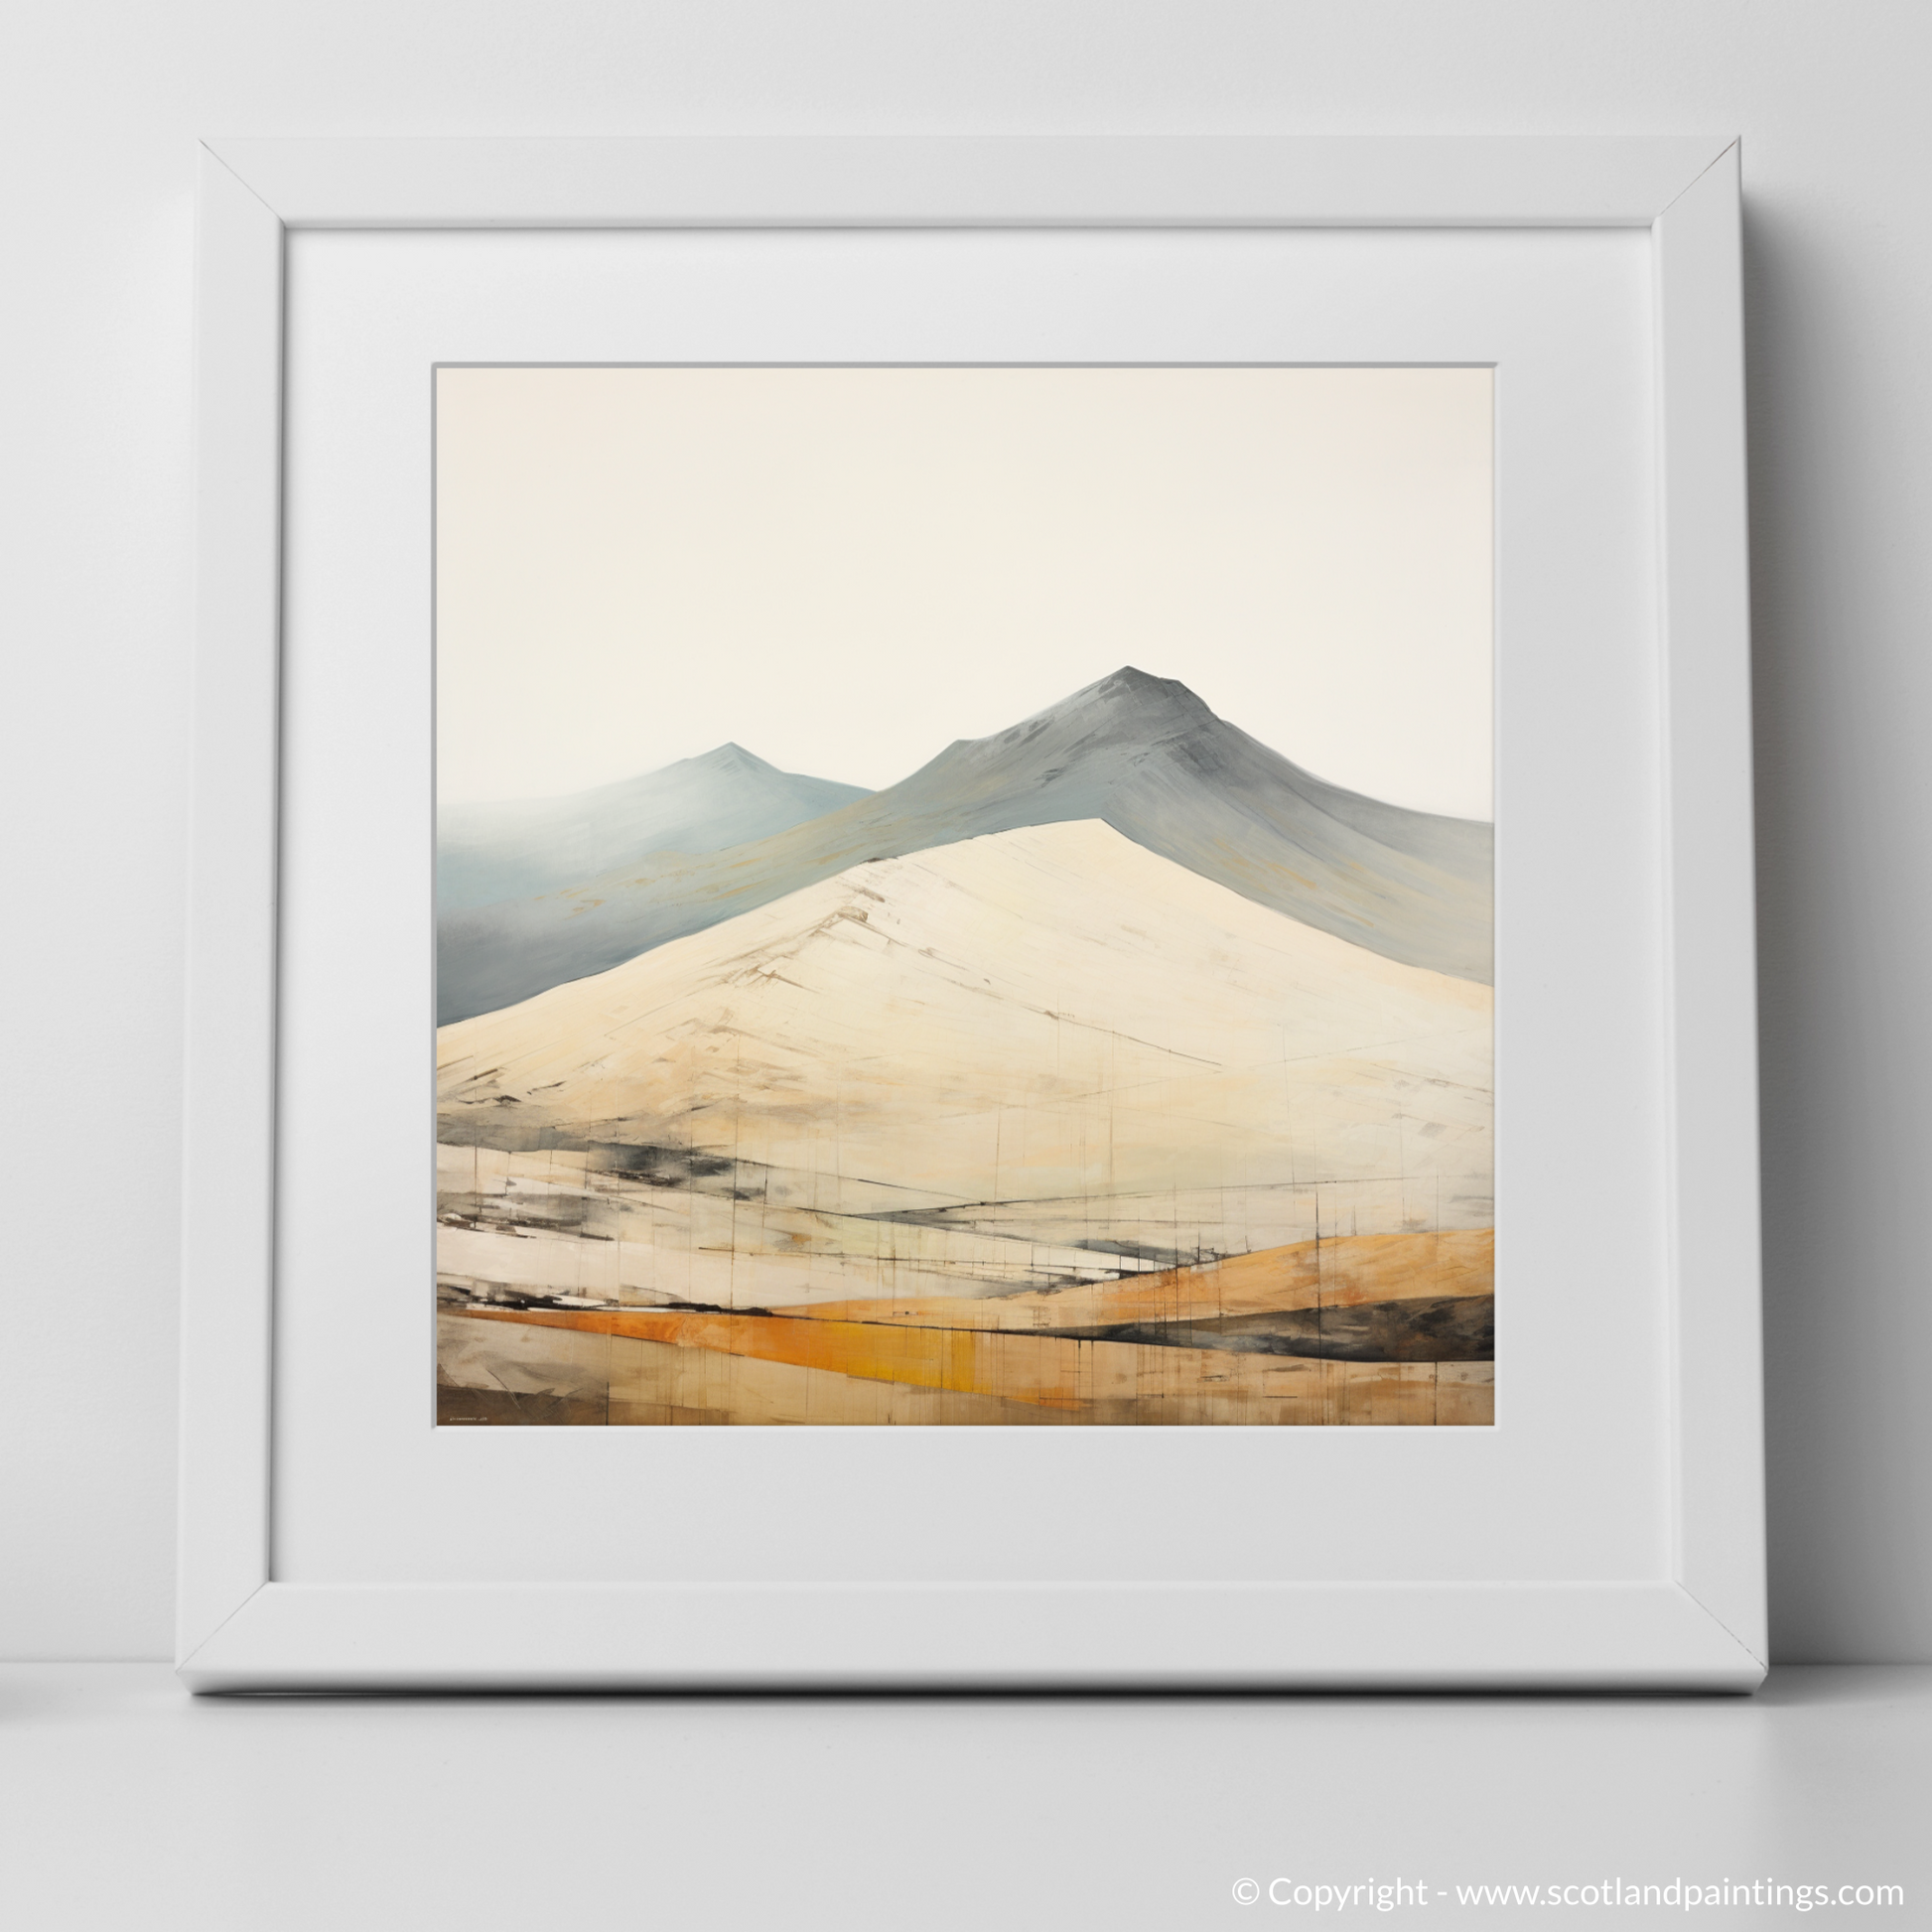 Art Print of Ben Lawers with a white frame